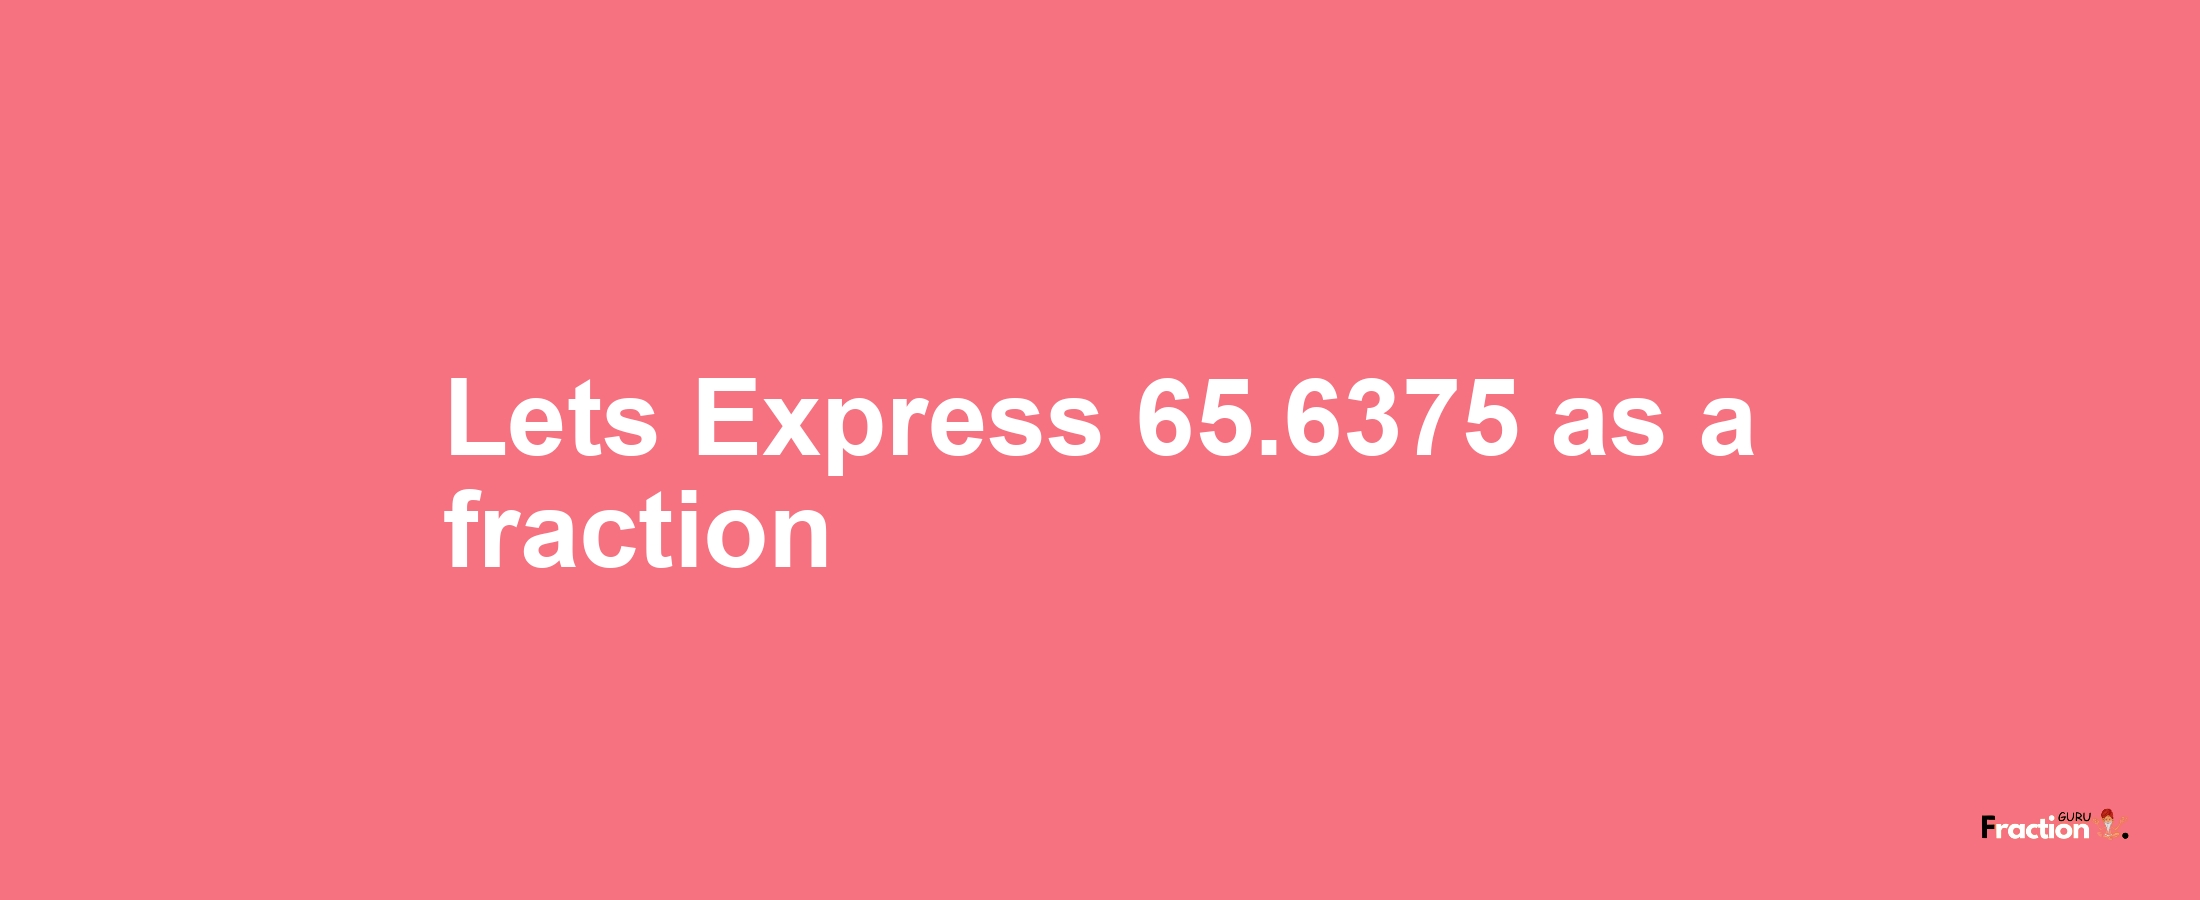 Lets Express 65.6375 as afraction